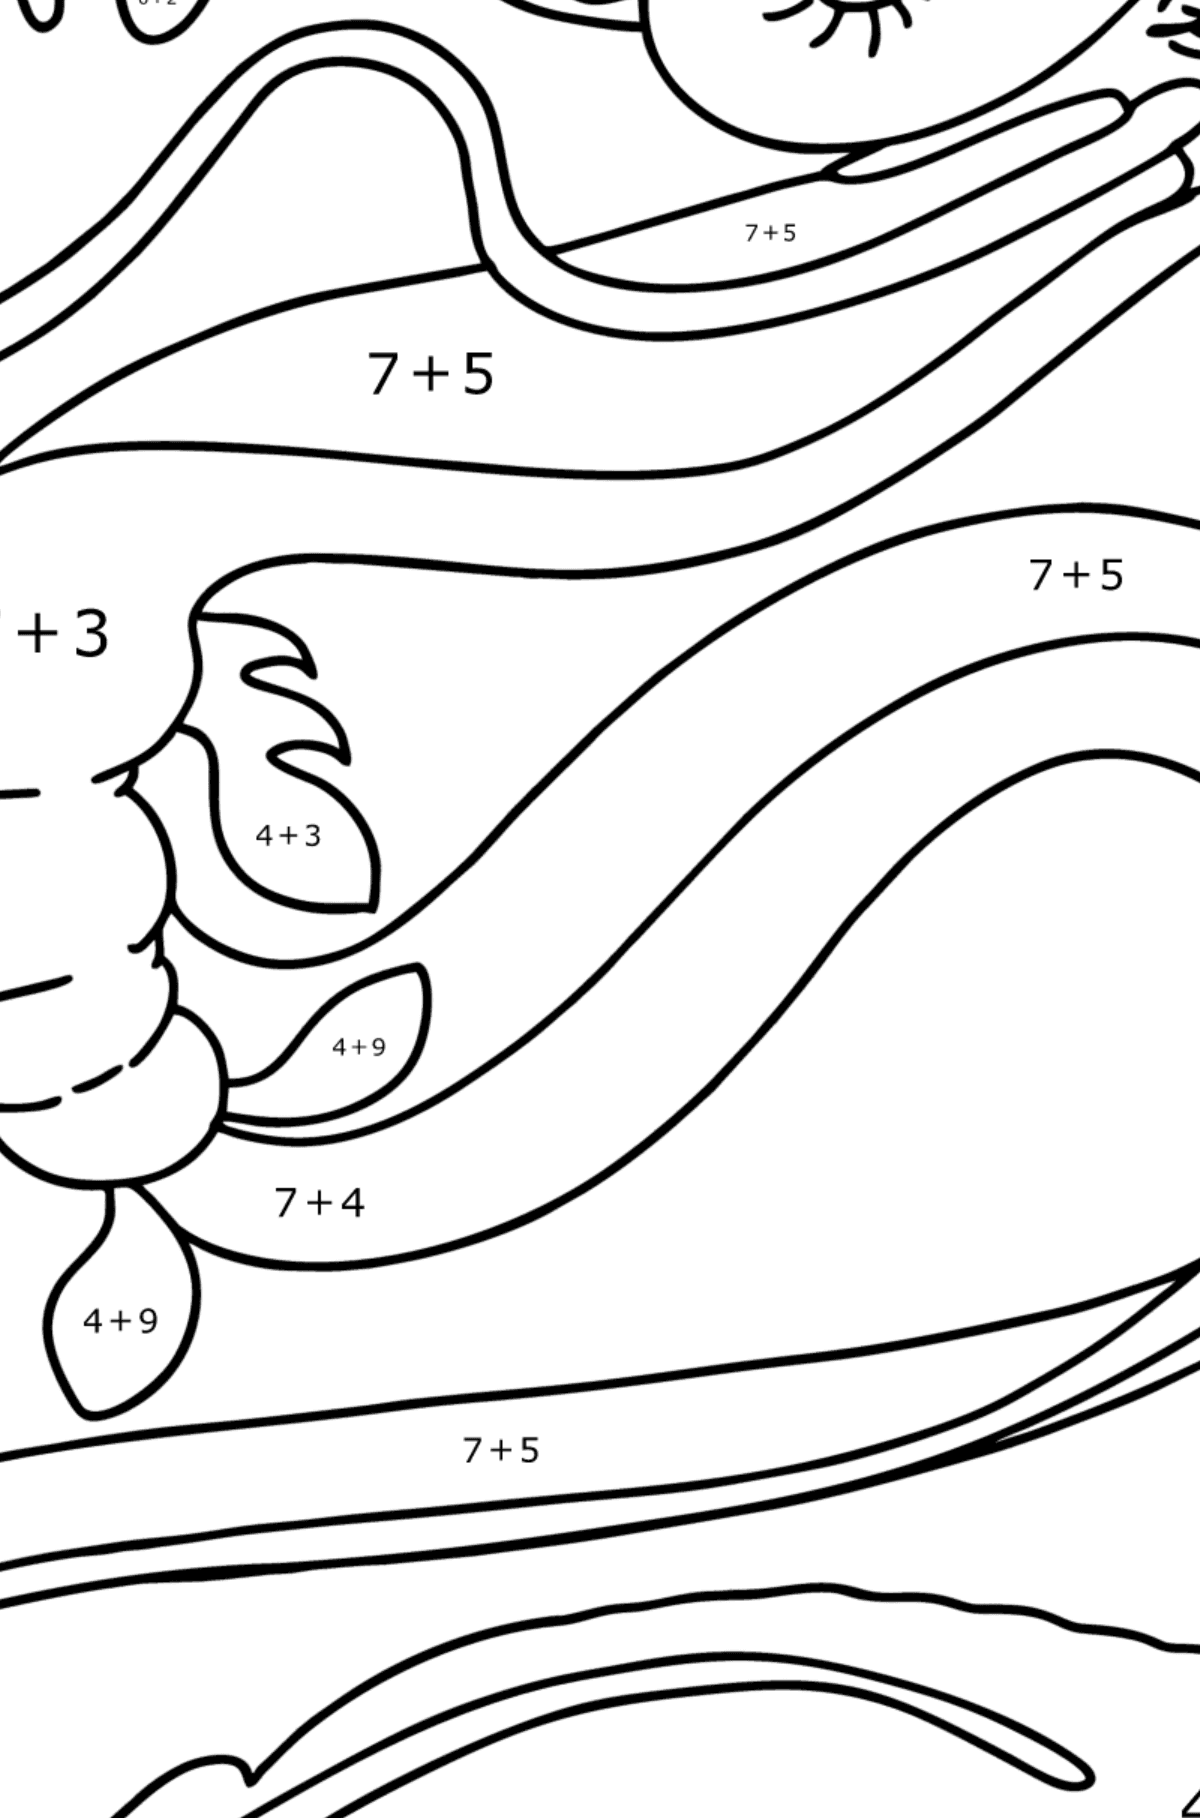 Snake Dragon coloring page - Math Coloring - Addition for Kids